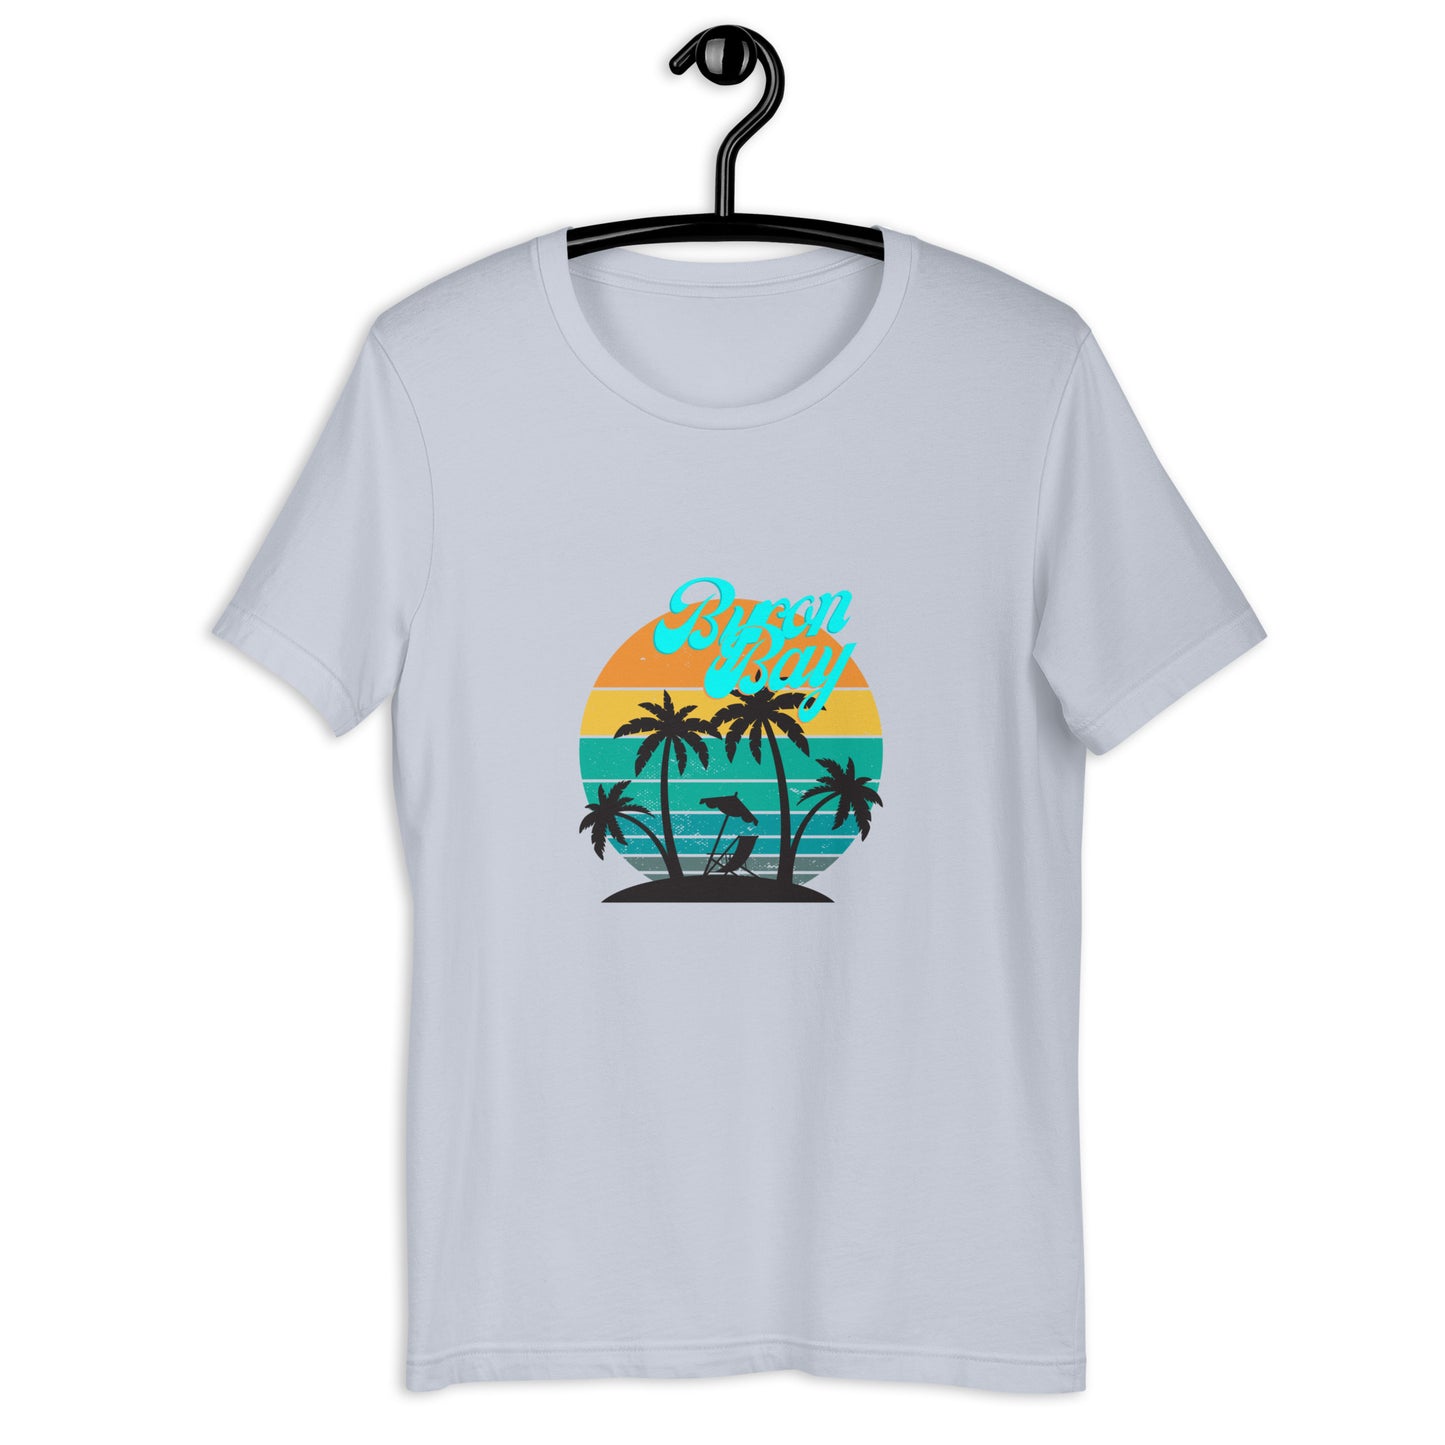  Unisex T-Shirt - light blue - Front flat lay view - Byron Bay design on front - Genuine Byron Bay Merchandise | Produced by Go Sea Kayak Byron Bay 